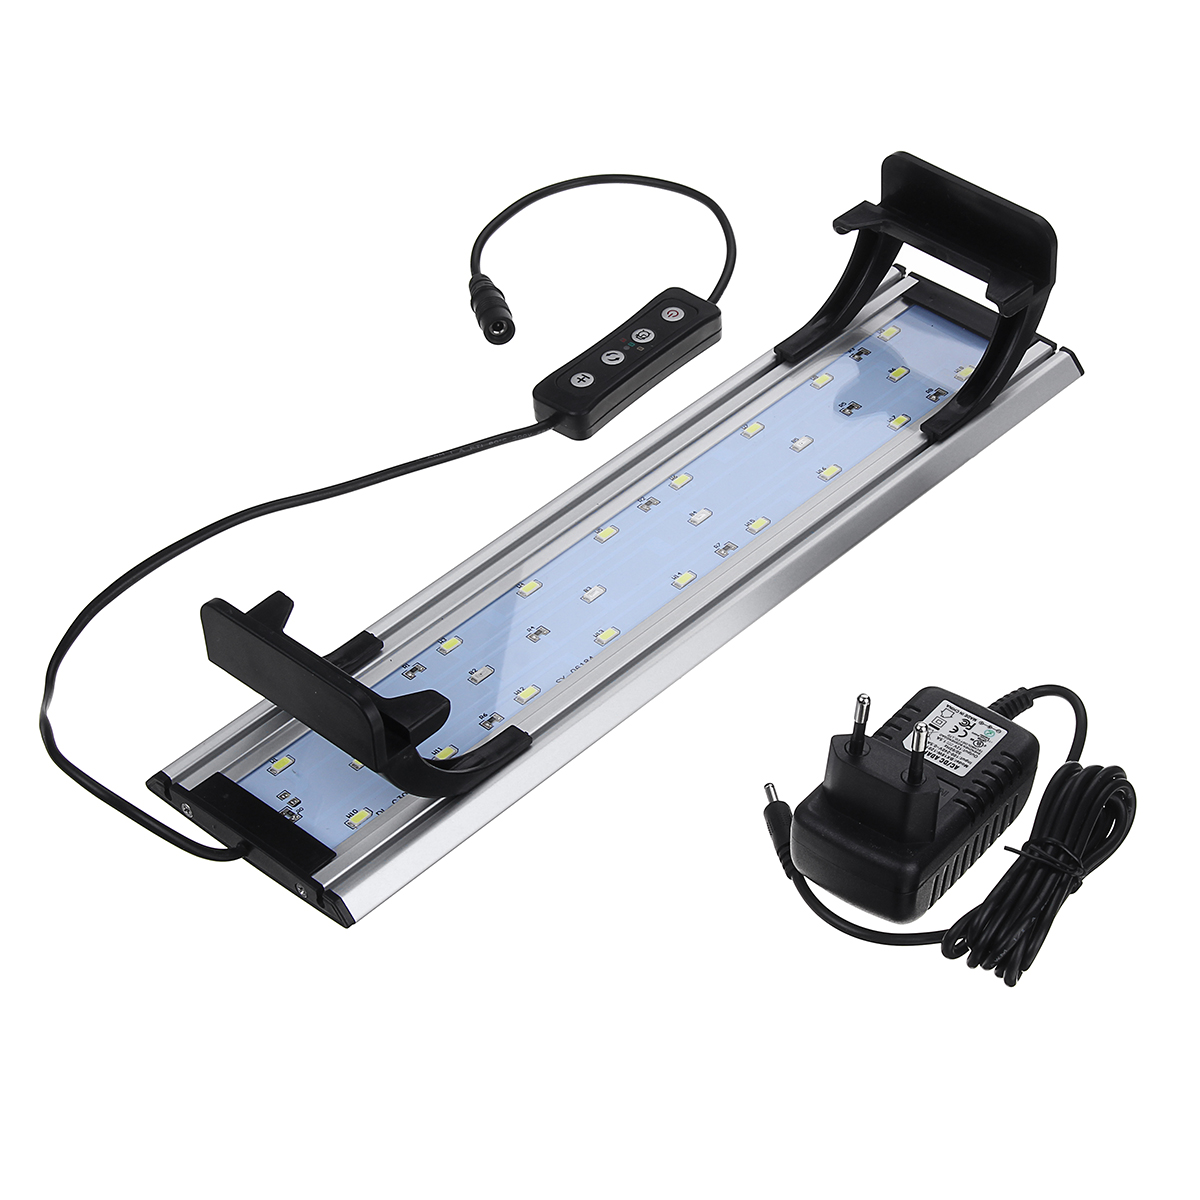 Dimmable--Timer-LED-Fish-Tank-Light-Lamp-Hood-Aquarium-Lighting-with-Extendable-Brackets-for-30CM-Ta-1639937-2